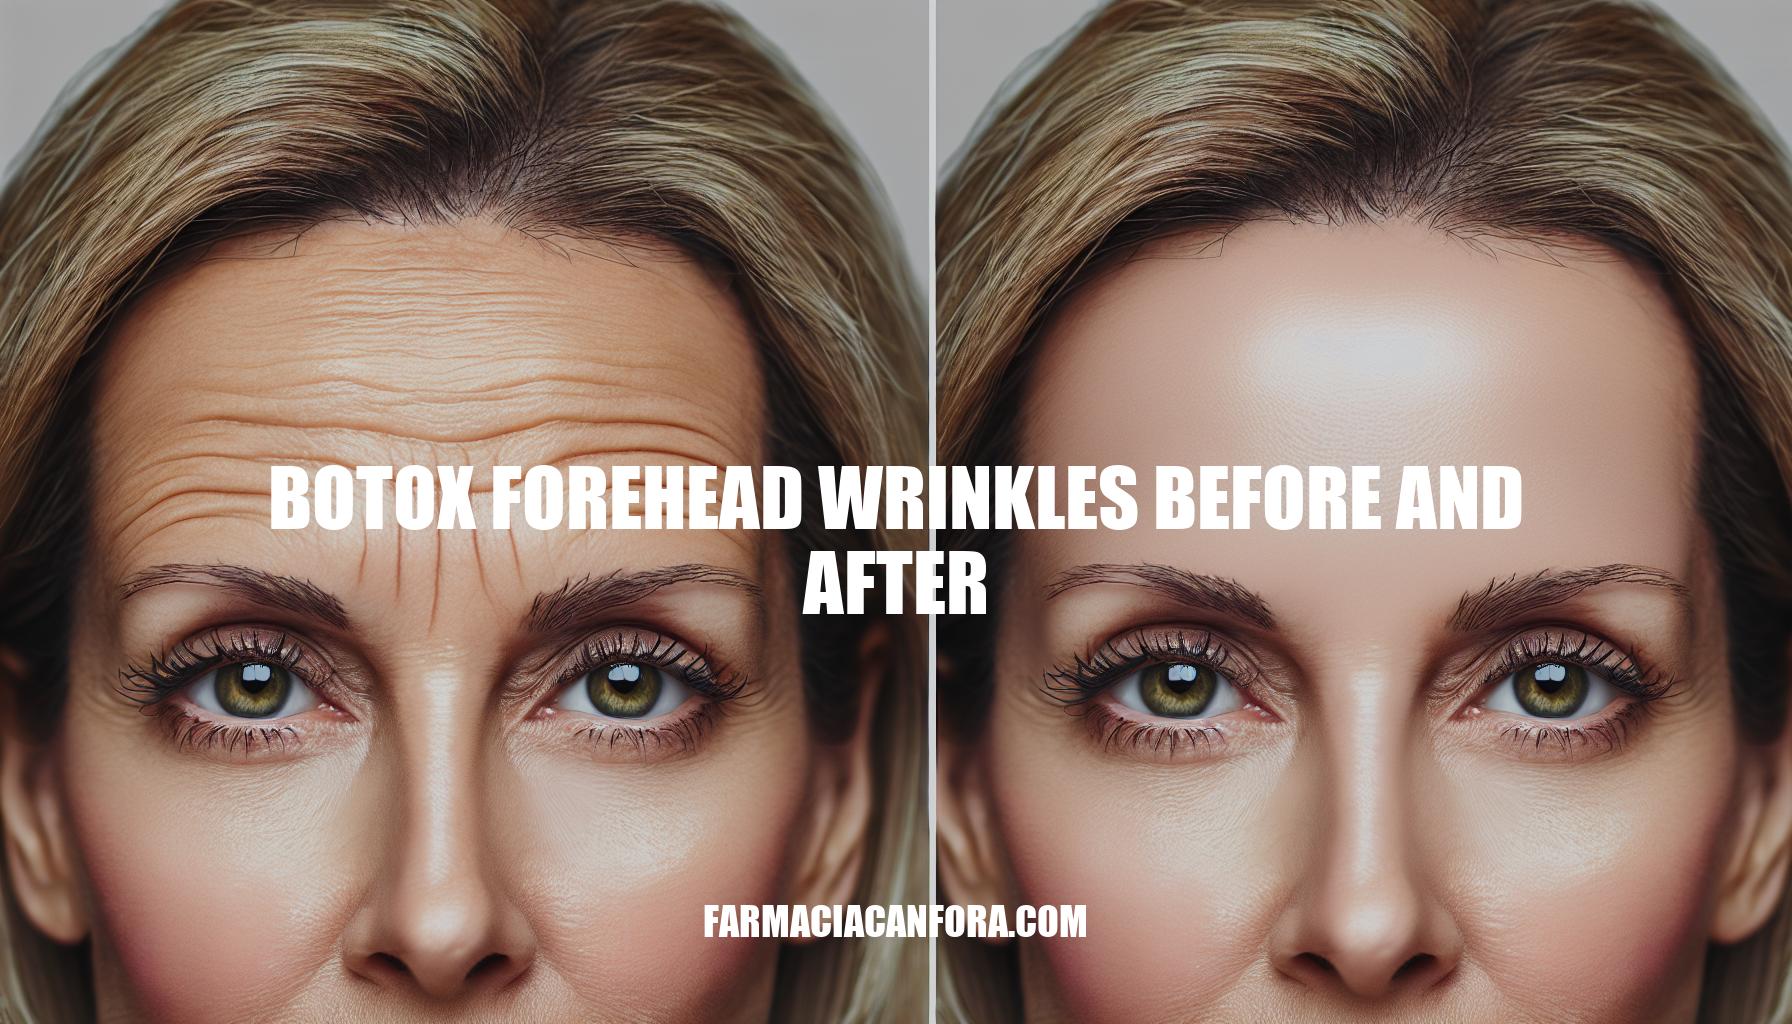 Botox Forehead Wrinkles Before and After: Expert Guide